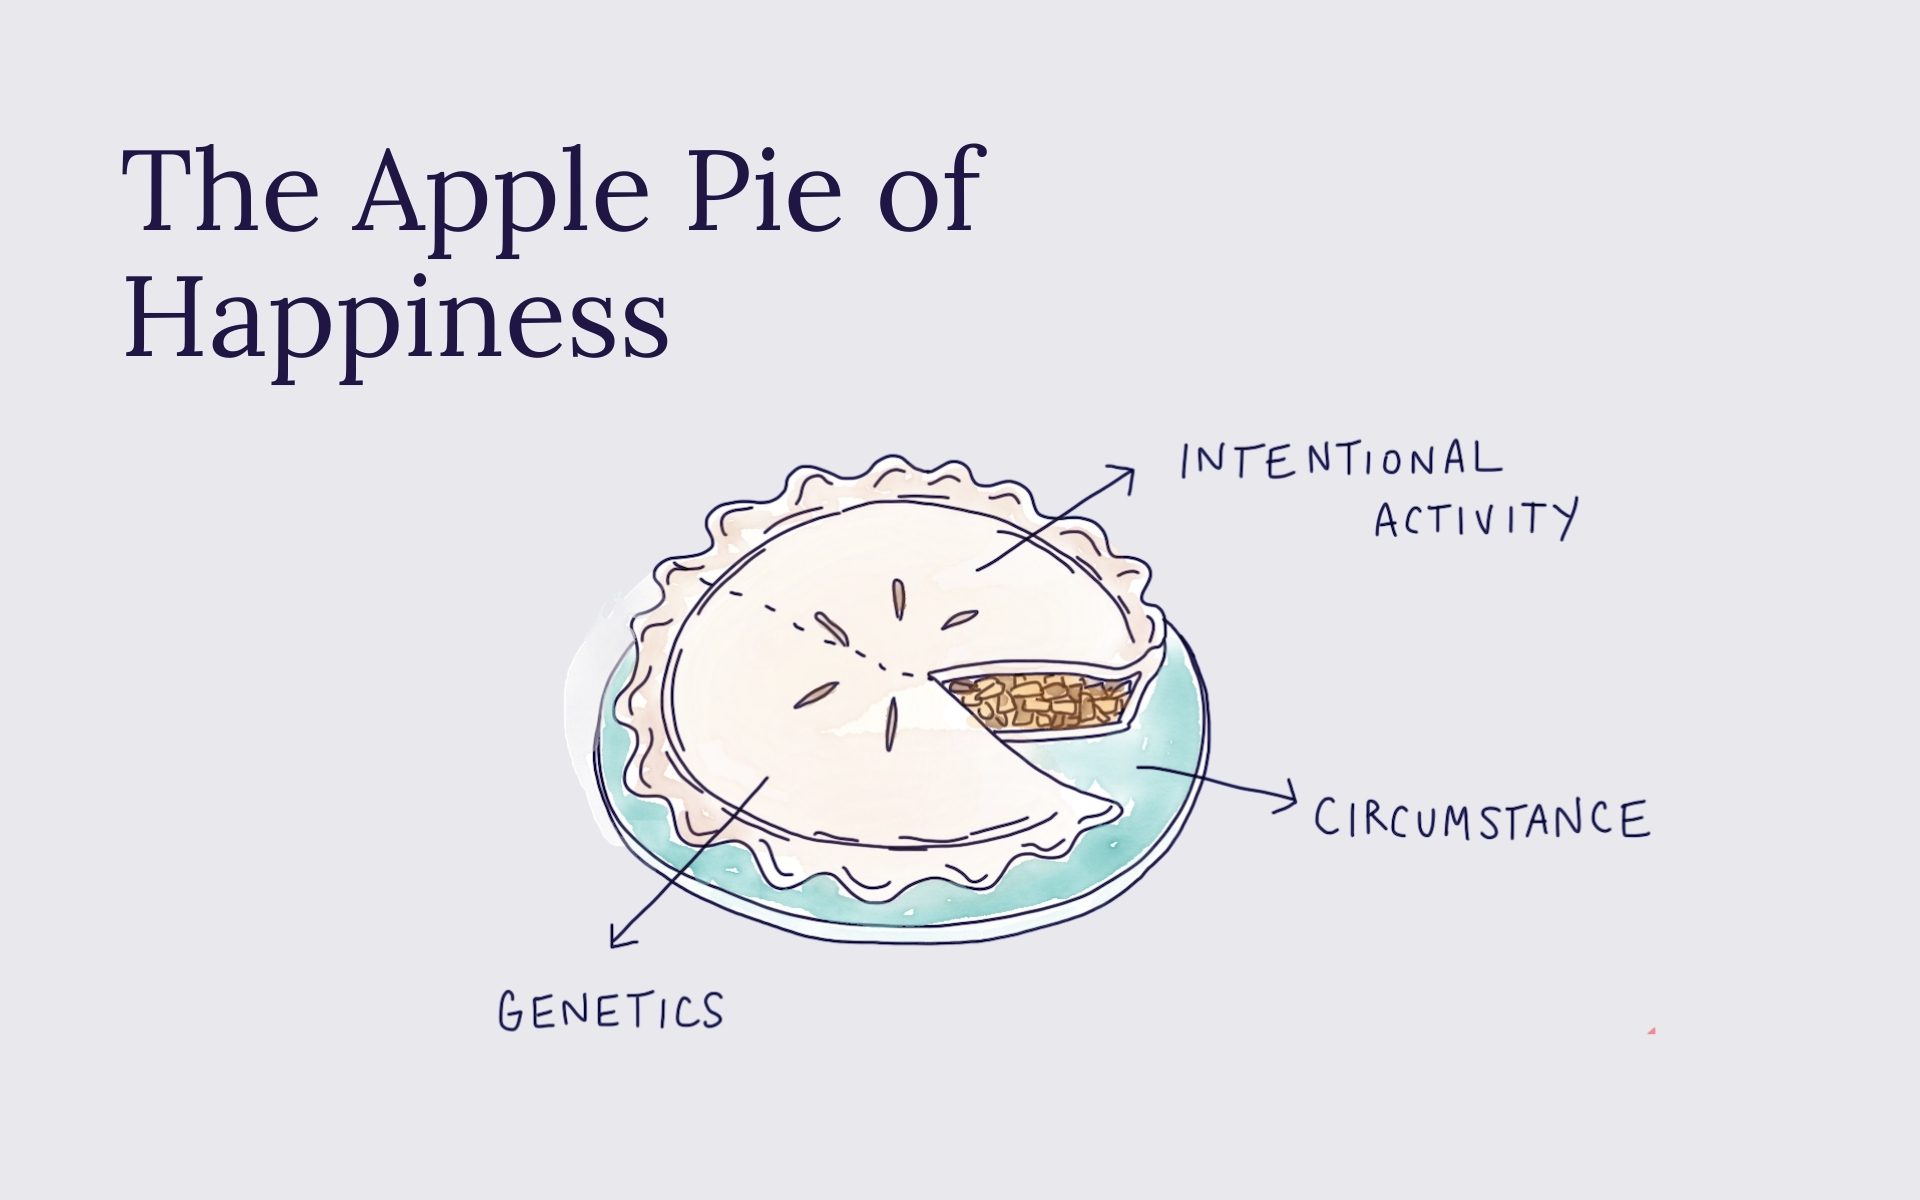 The Apple Pie of Happiness